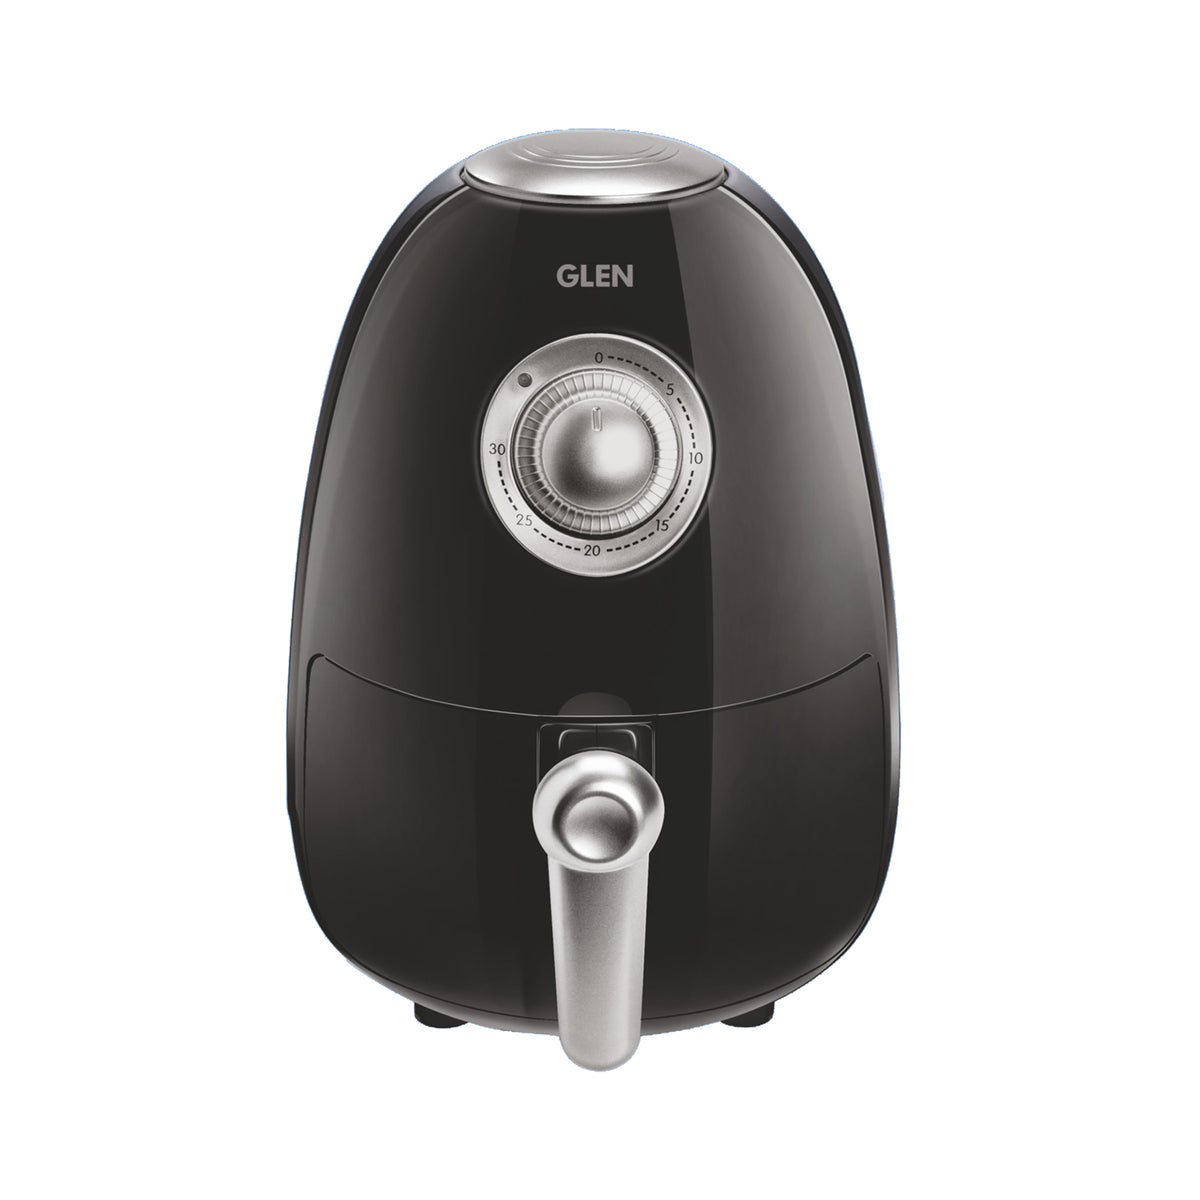 When I Tried A Mini Air Fryer For The First Time — Glen Appliances Pvt. Ltd